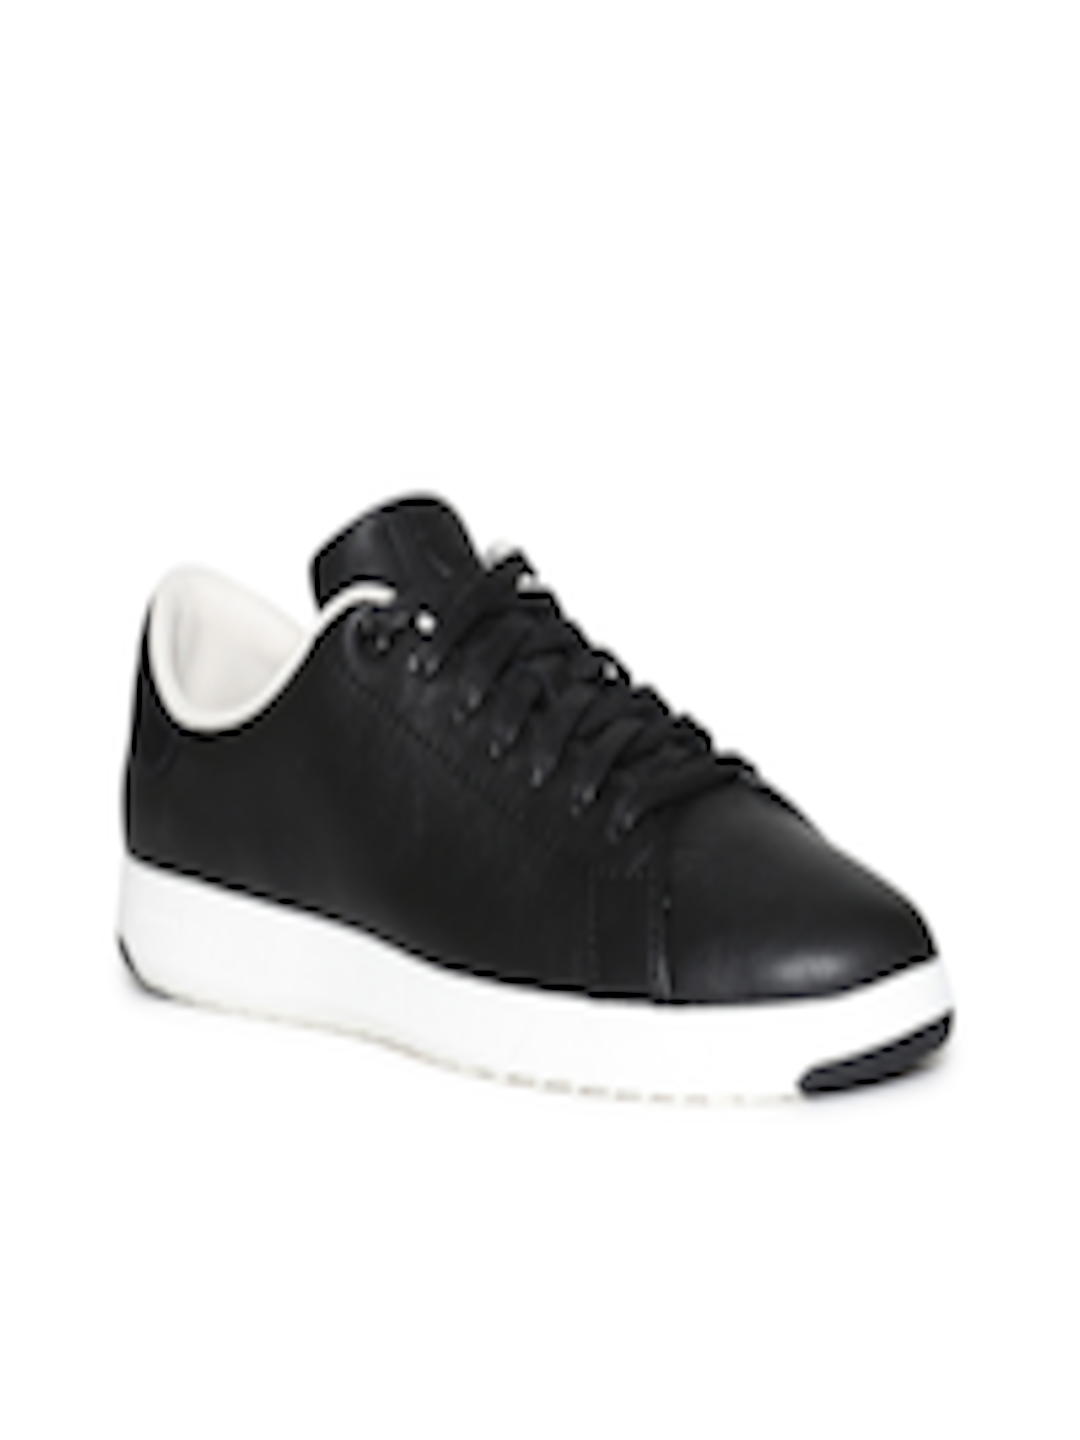 Buy Cole Haan Women Black Leather Sneakers - Casual Shoes for Women ...